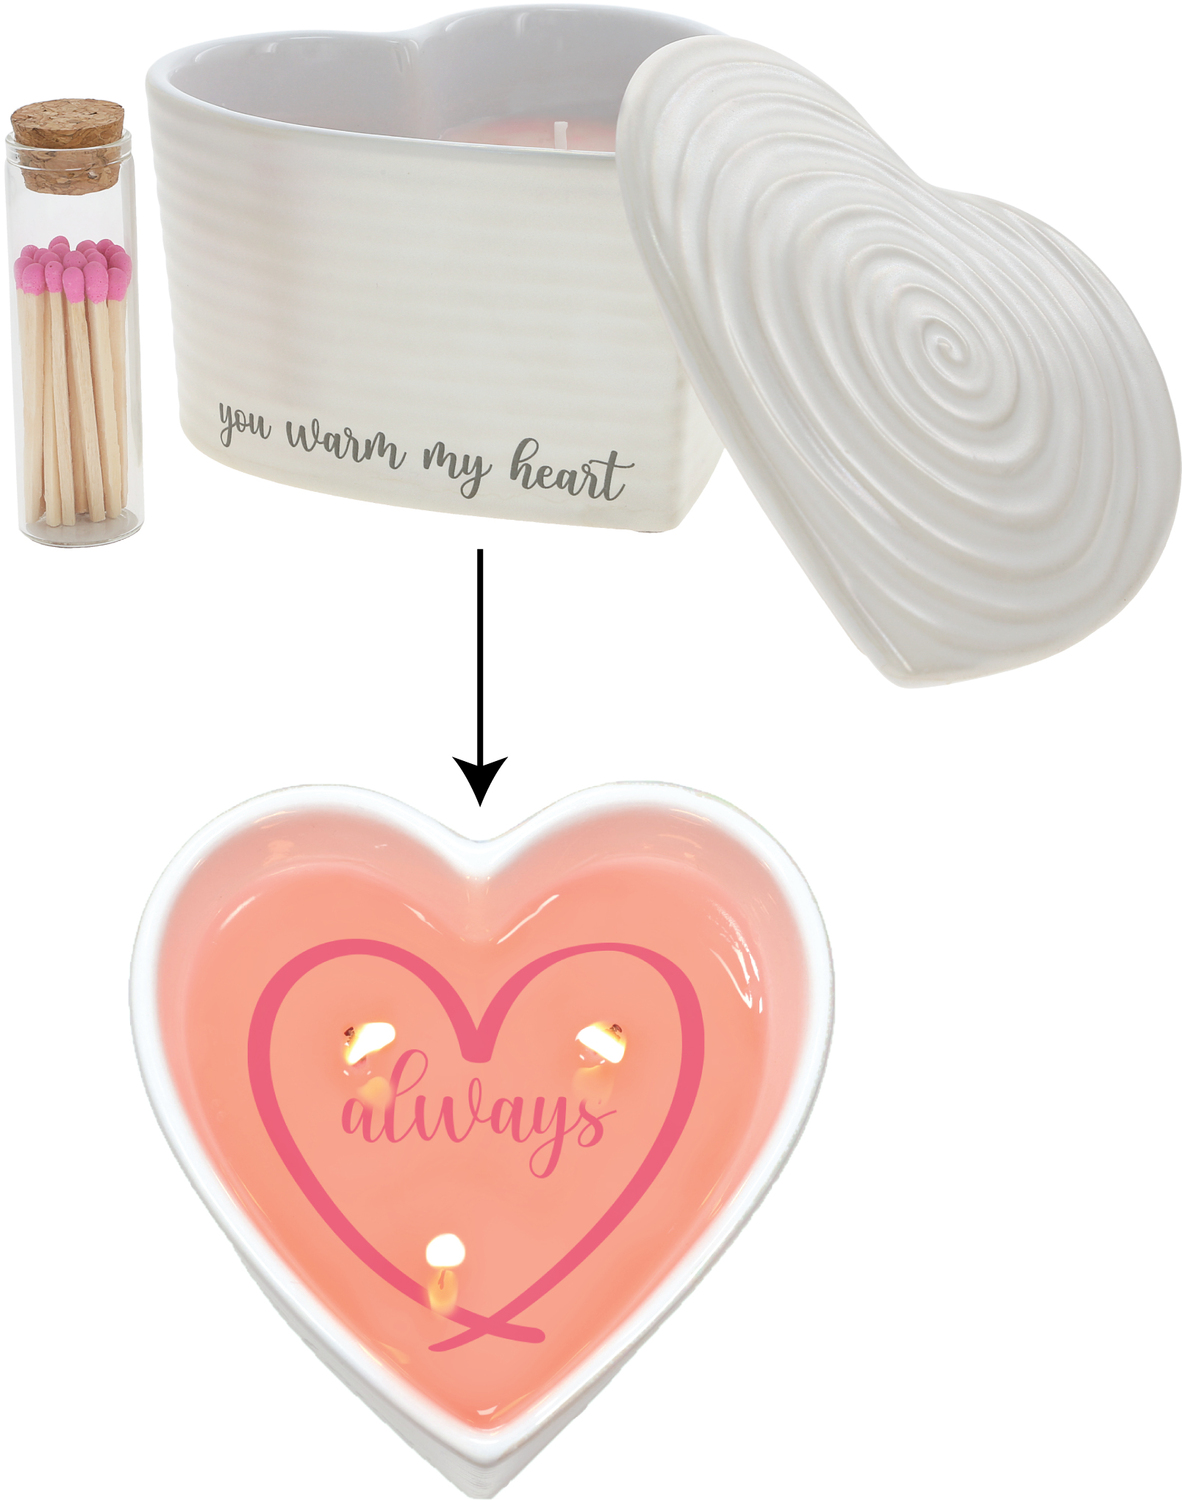 Warm My Heart by Thoughts of Home - Warm My Heart - 8 oz - 100% Soy Wax Reveal Triple Wick Candle with Matches
Scent: Vanilla